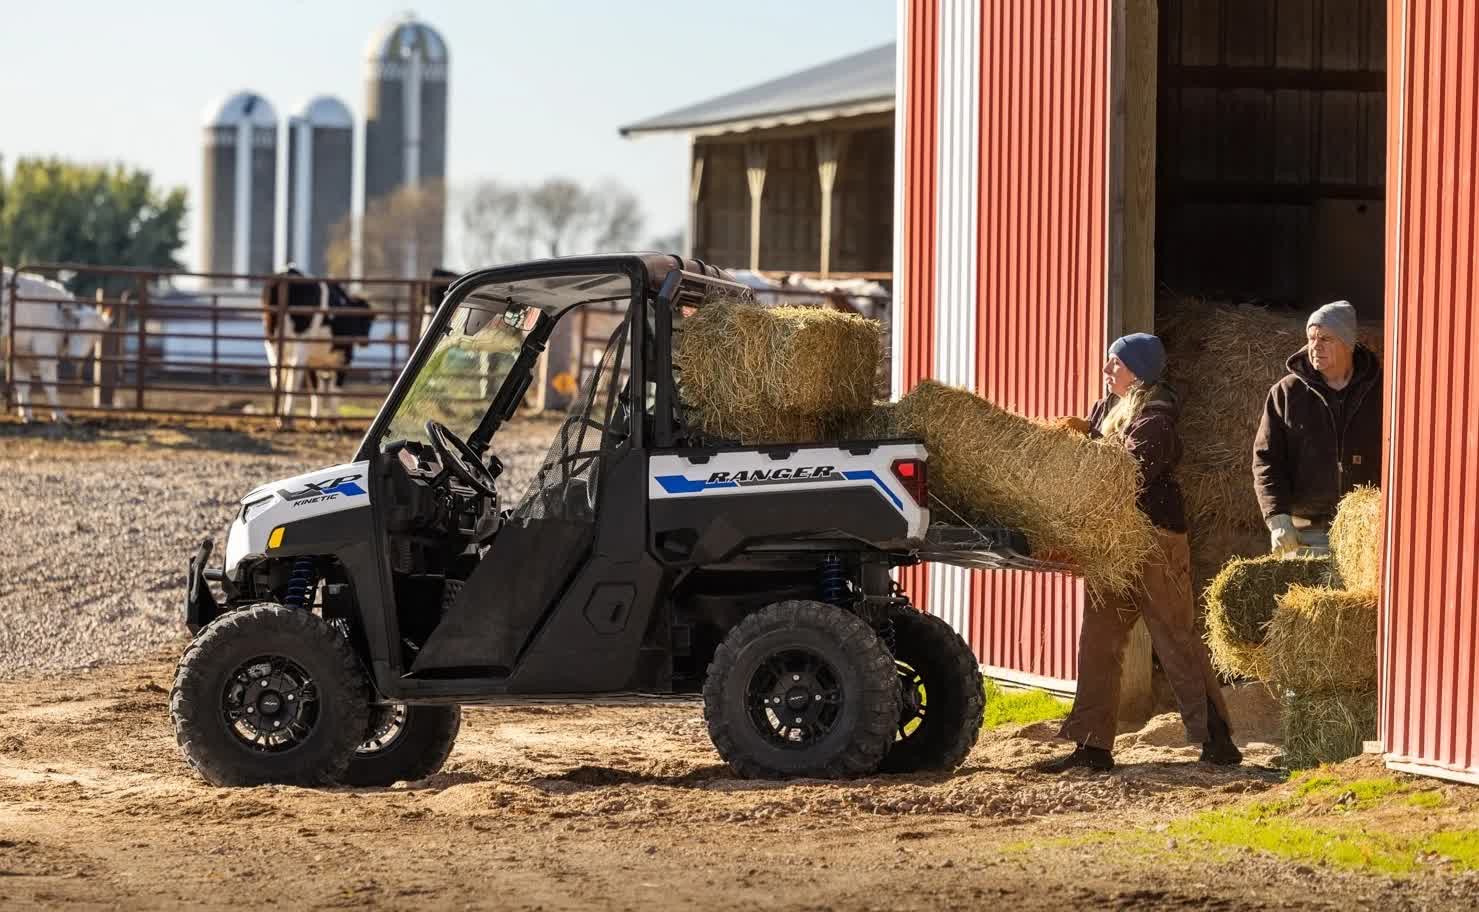 Polaris introduces its first all-electric UTV, the Ranger XP Kinetic